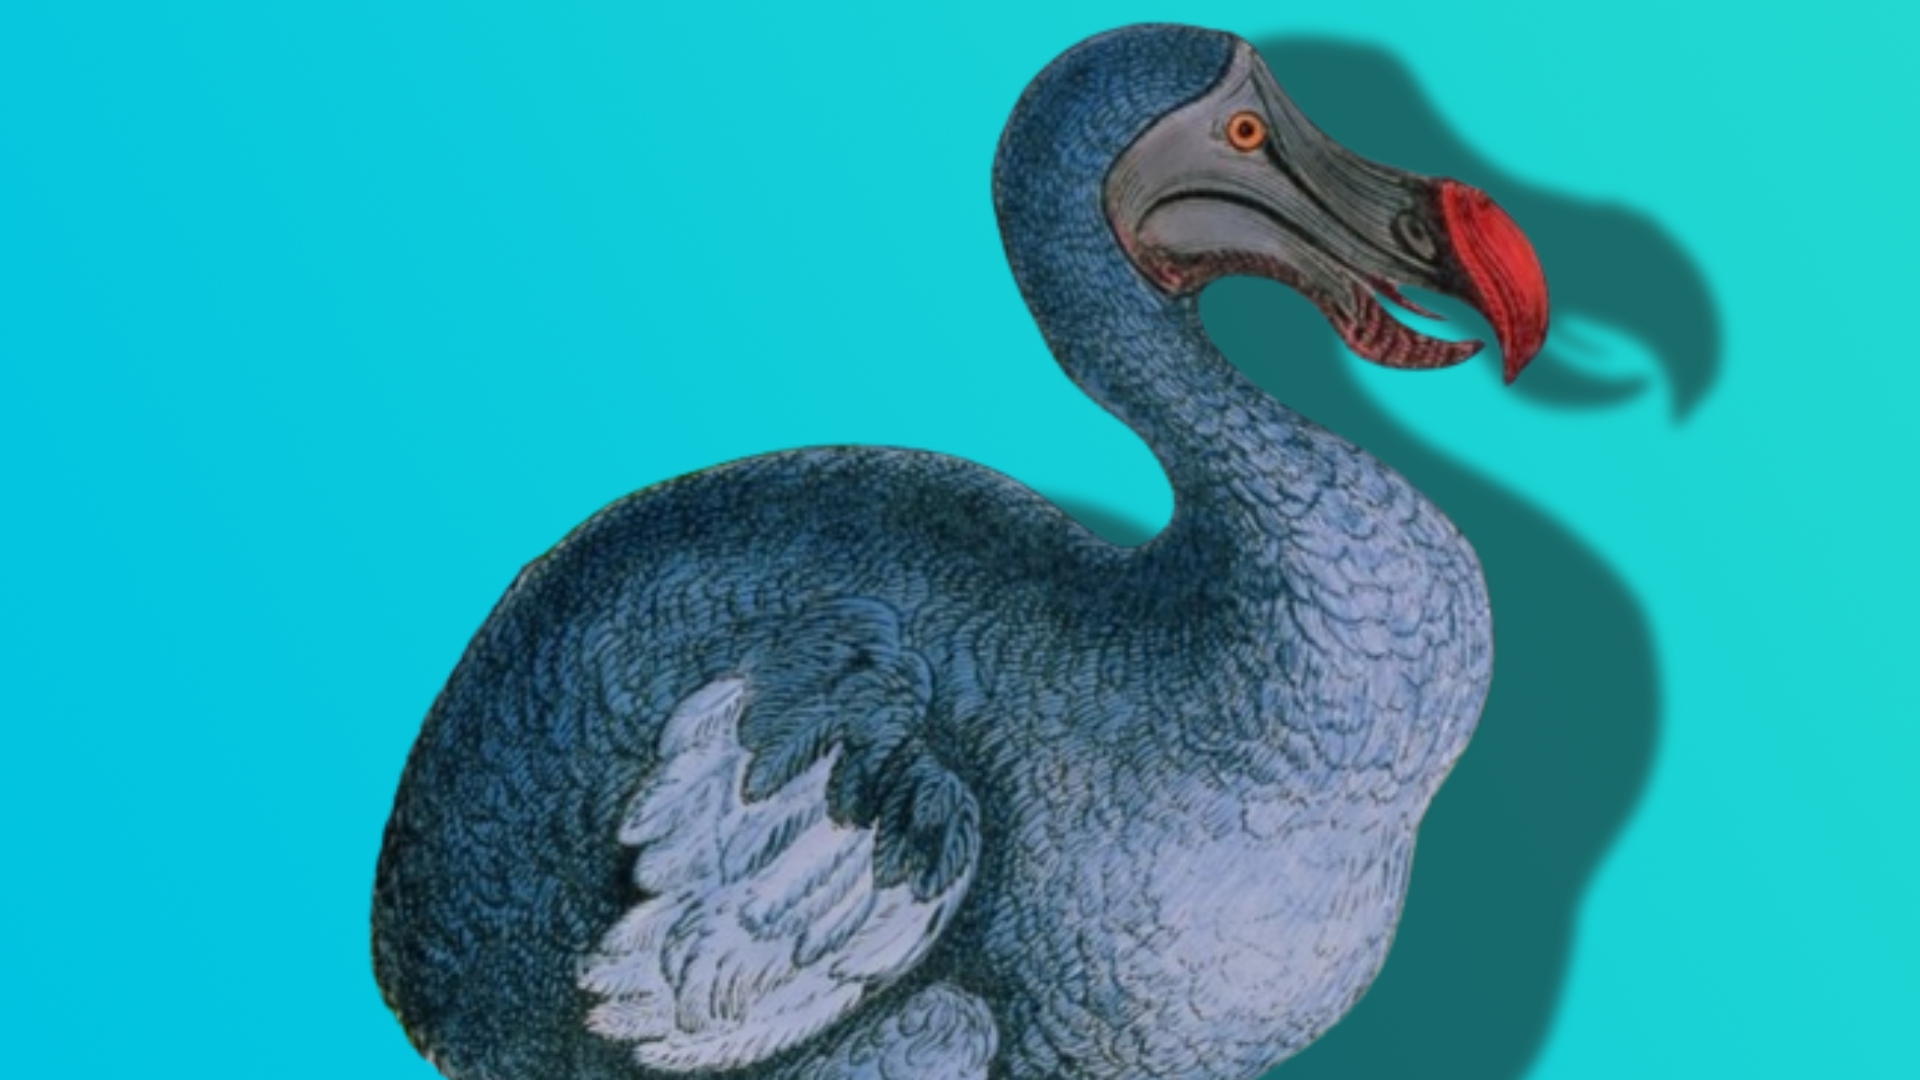 Could we bring the dodo back from extinction? - BBC Newsround